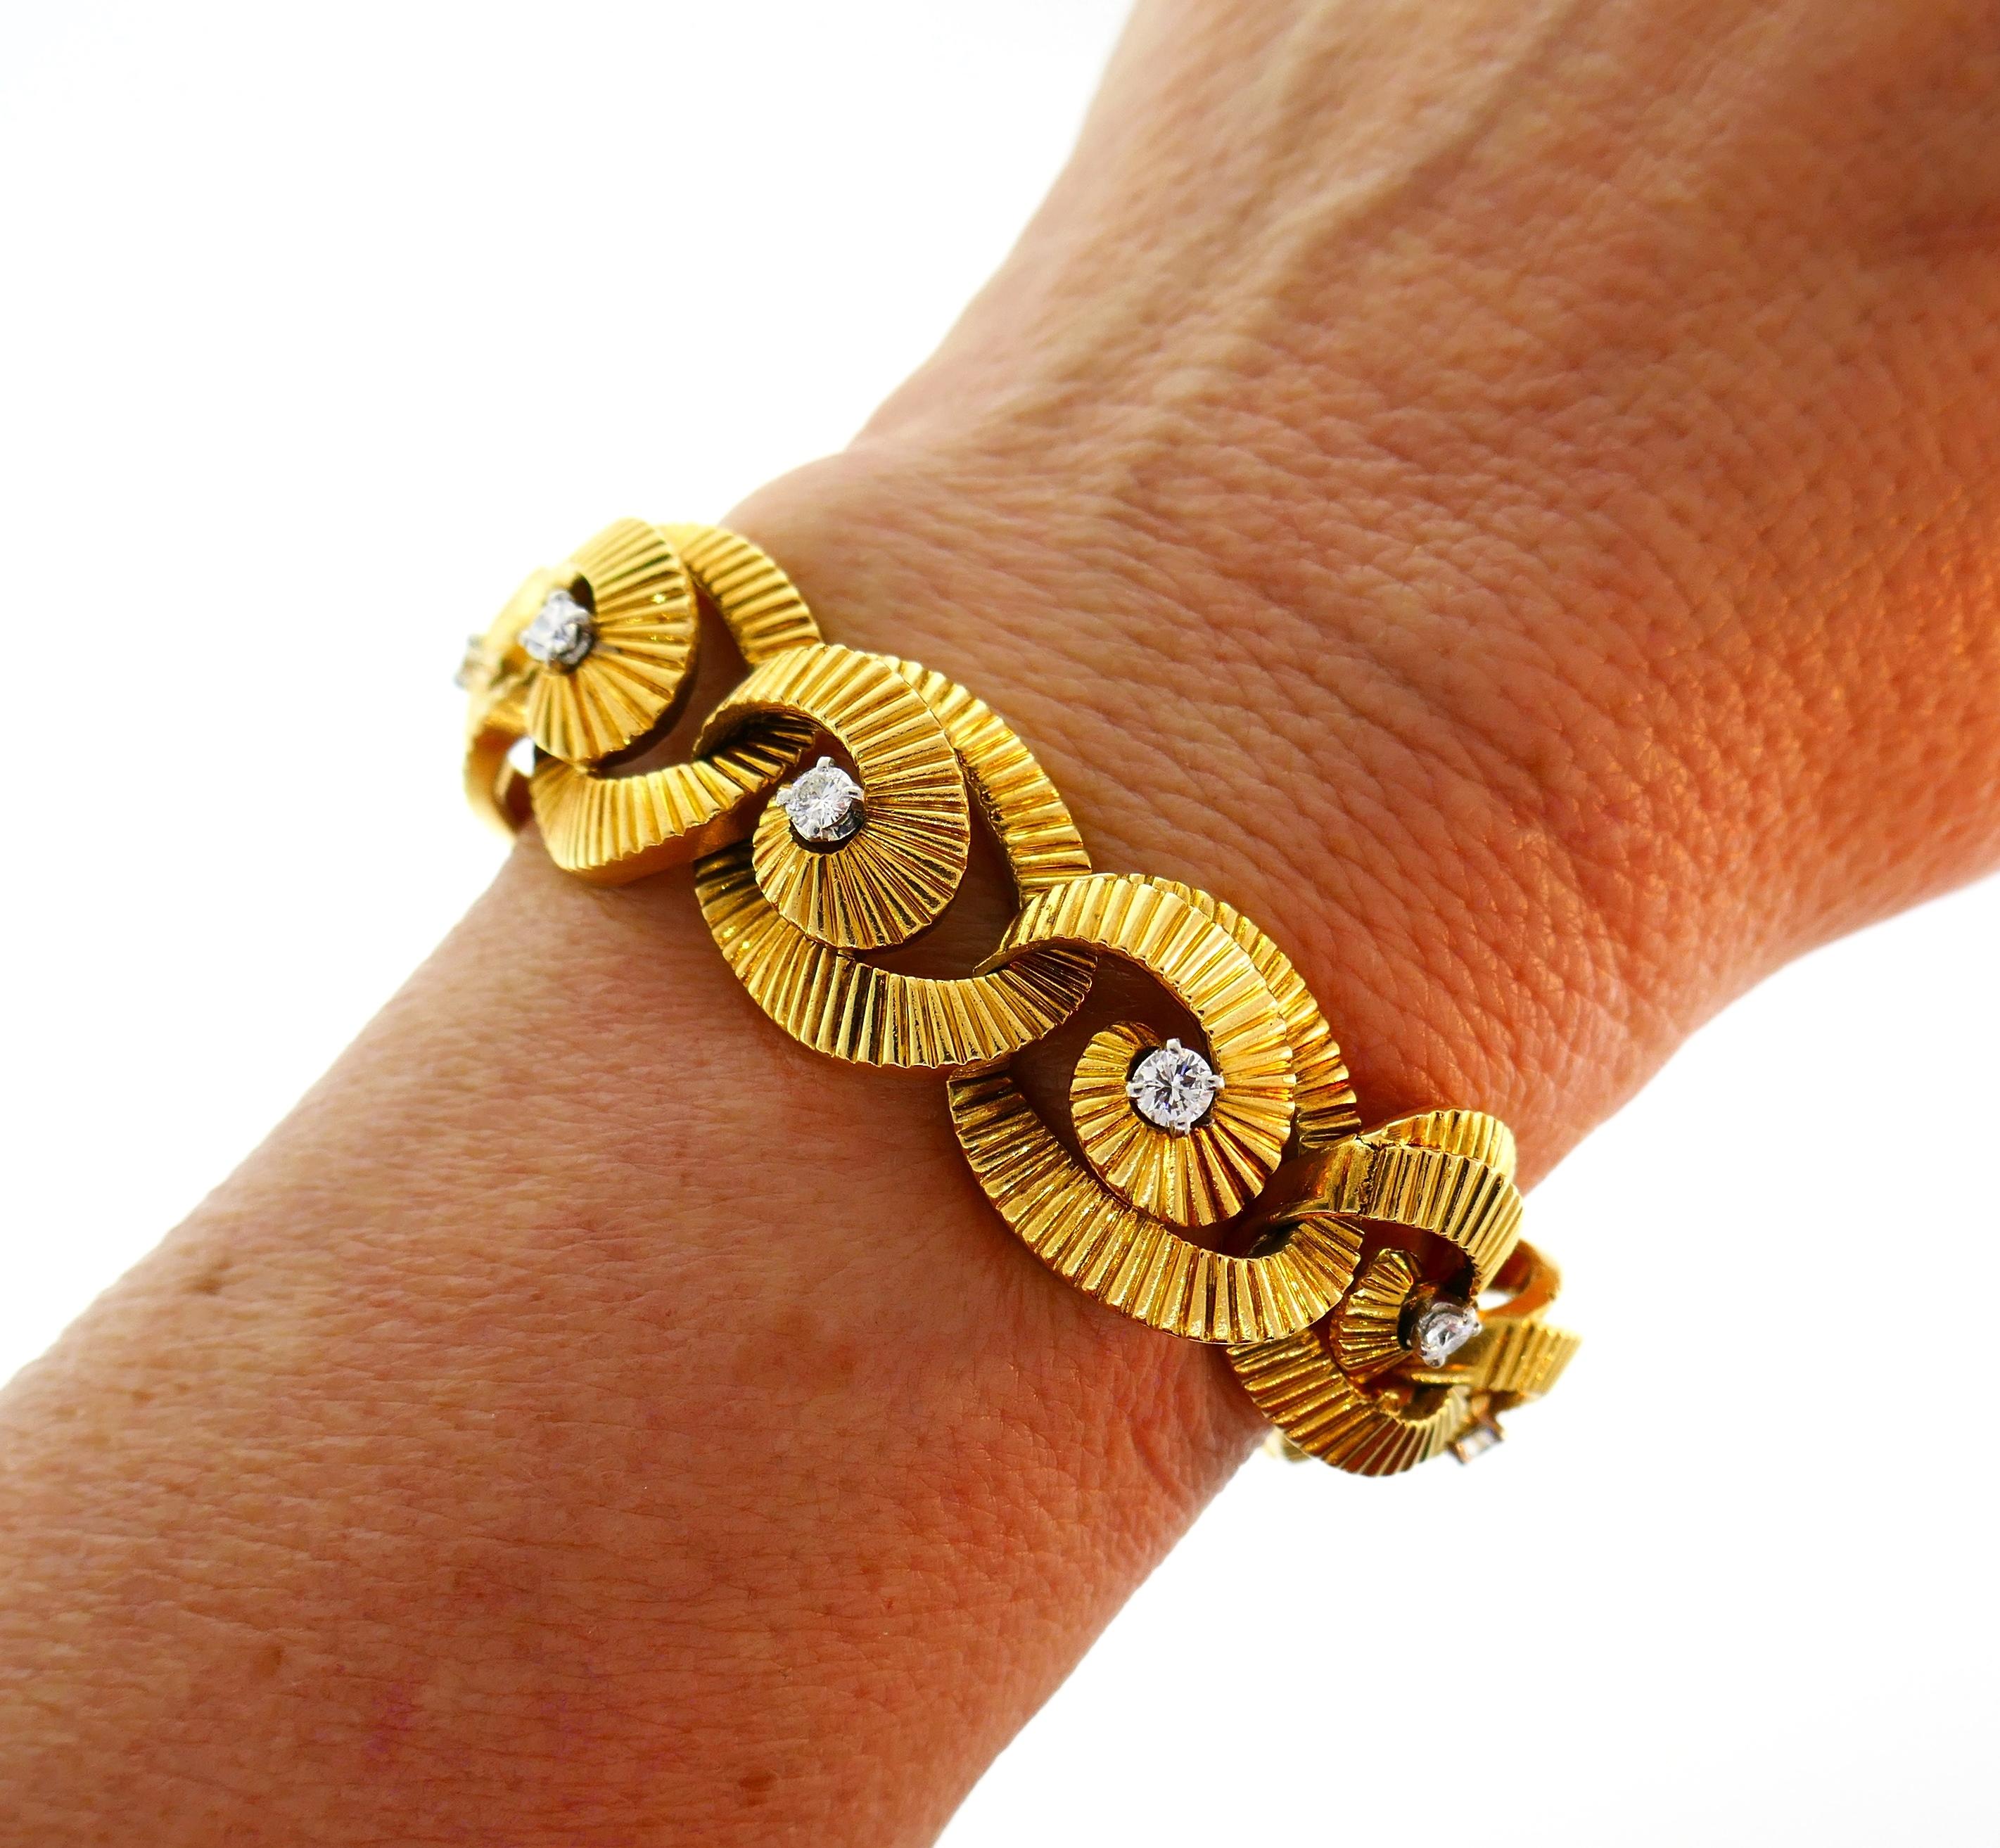 A classy vintage bracelet created by Regner in France in the 1970s. Feminine, elegant and wearable, the bracelet is a great addition to your jewelry collection. 
The bracelet is made of 18 karat yellow gold and set with twelve round brilliant cut